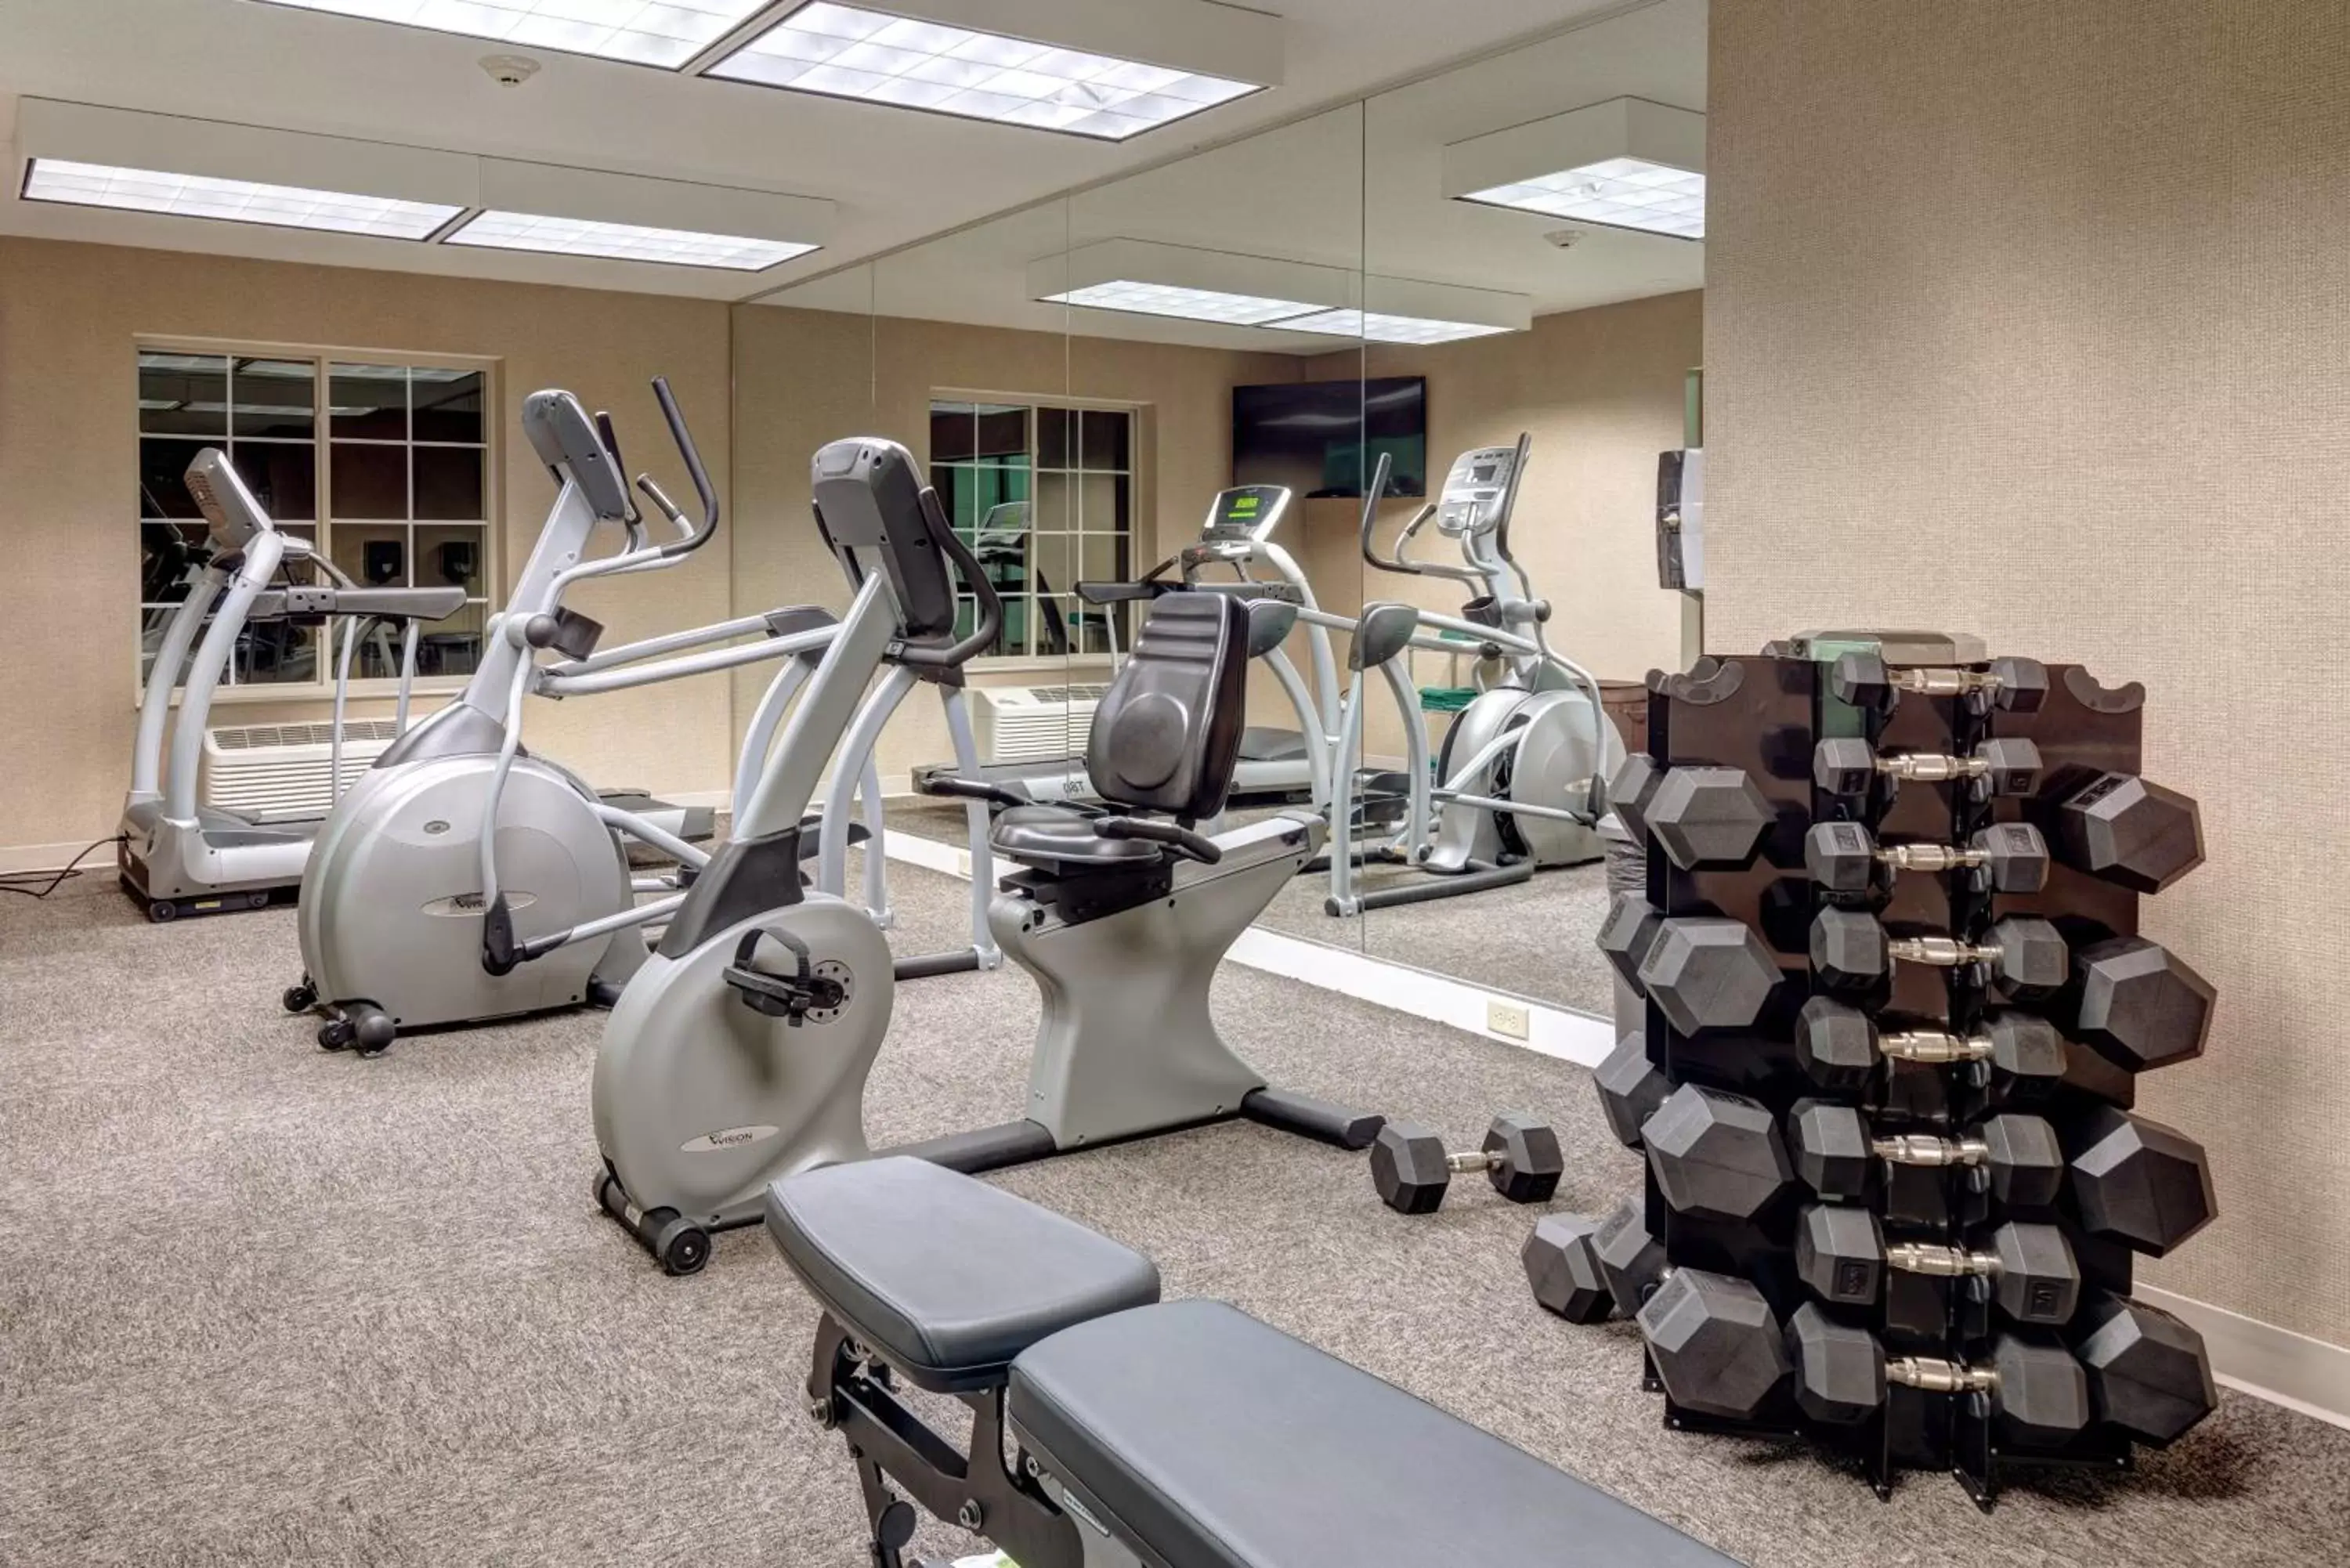 Fitness centre/facilities, Fitness Center/Facilities in The Garrison Hotel & Suites Dover-Durham, Ascend Hotel Collection